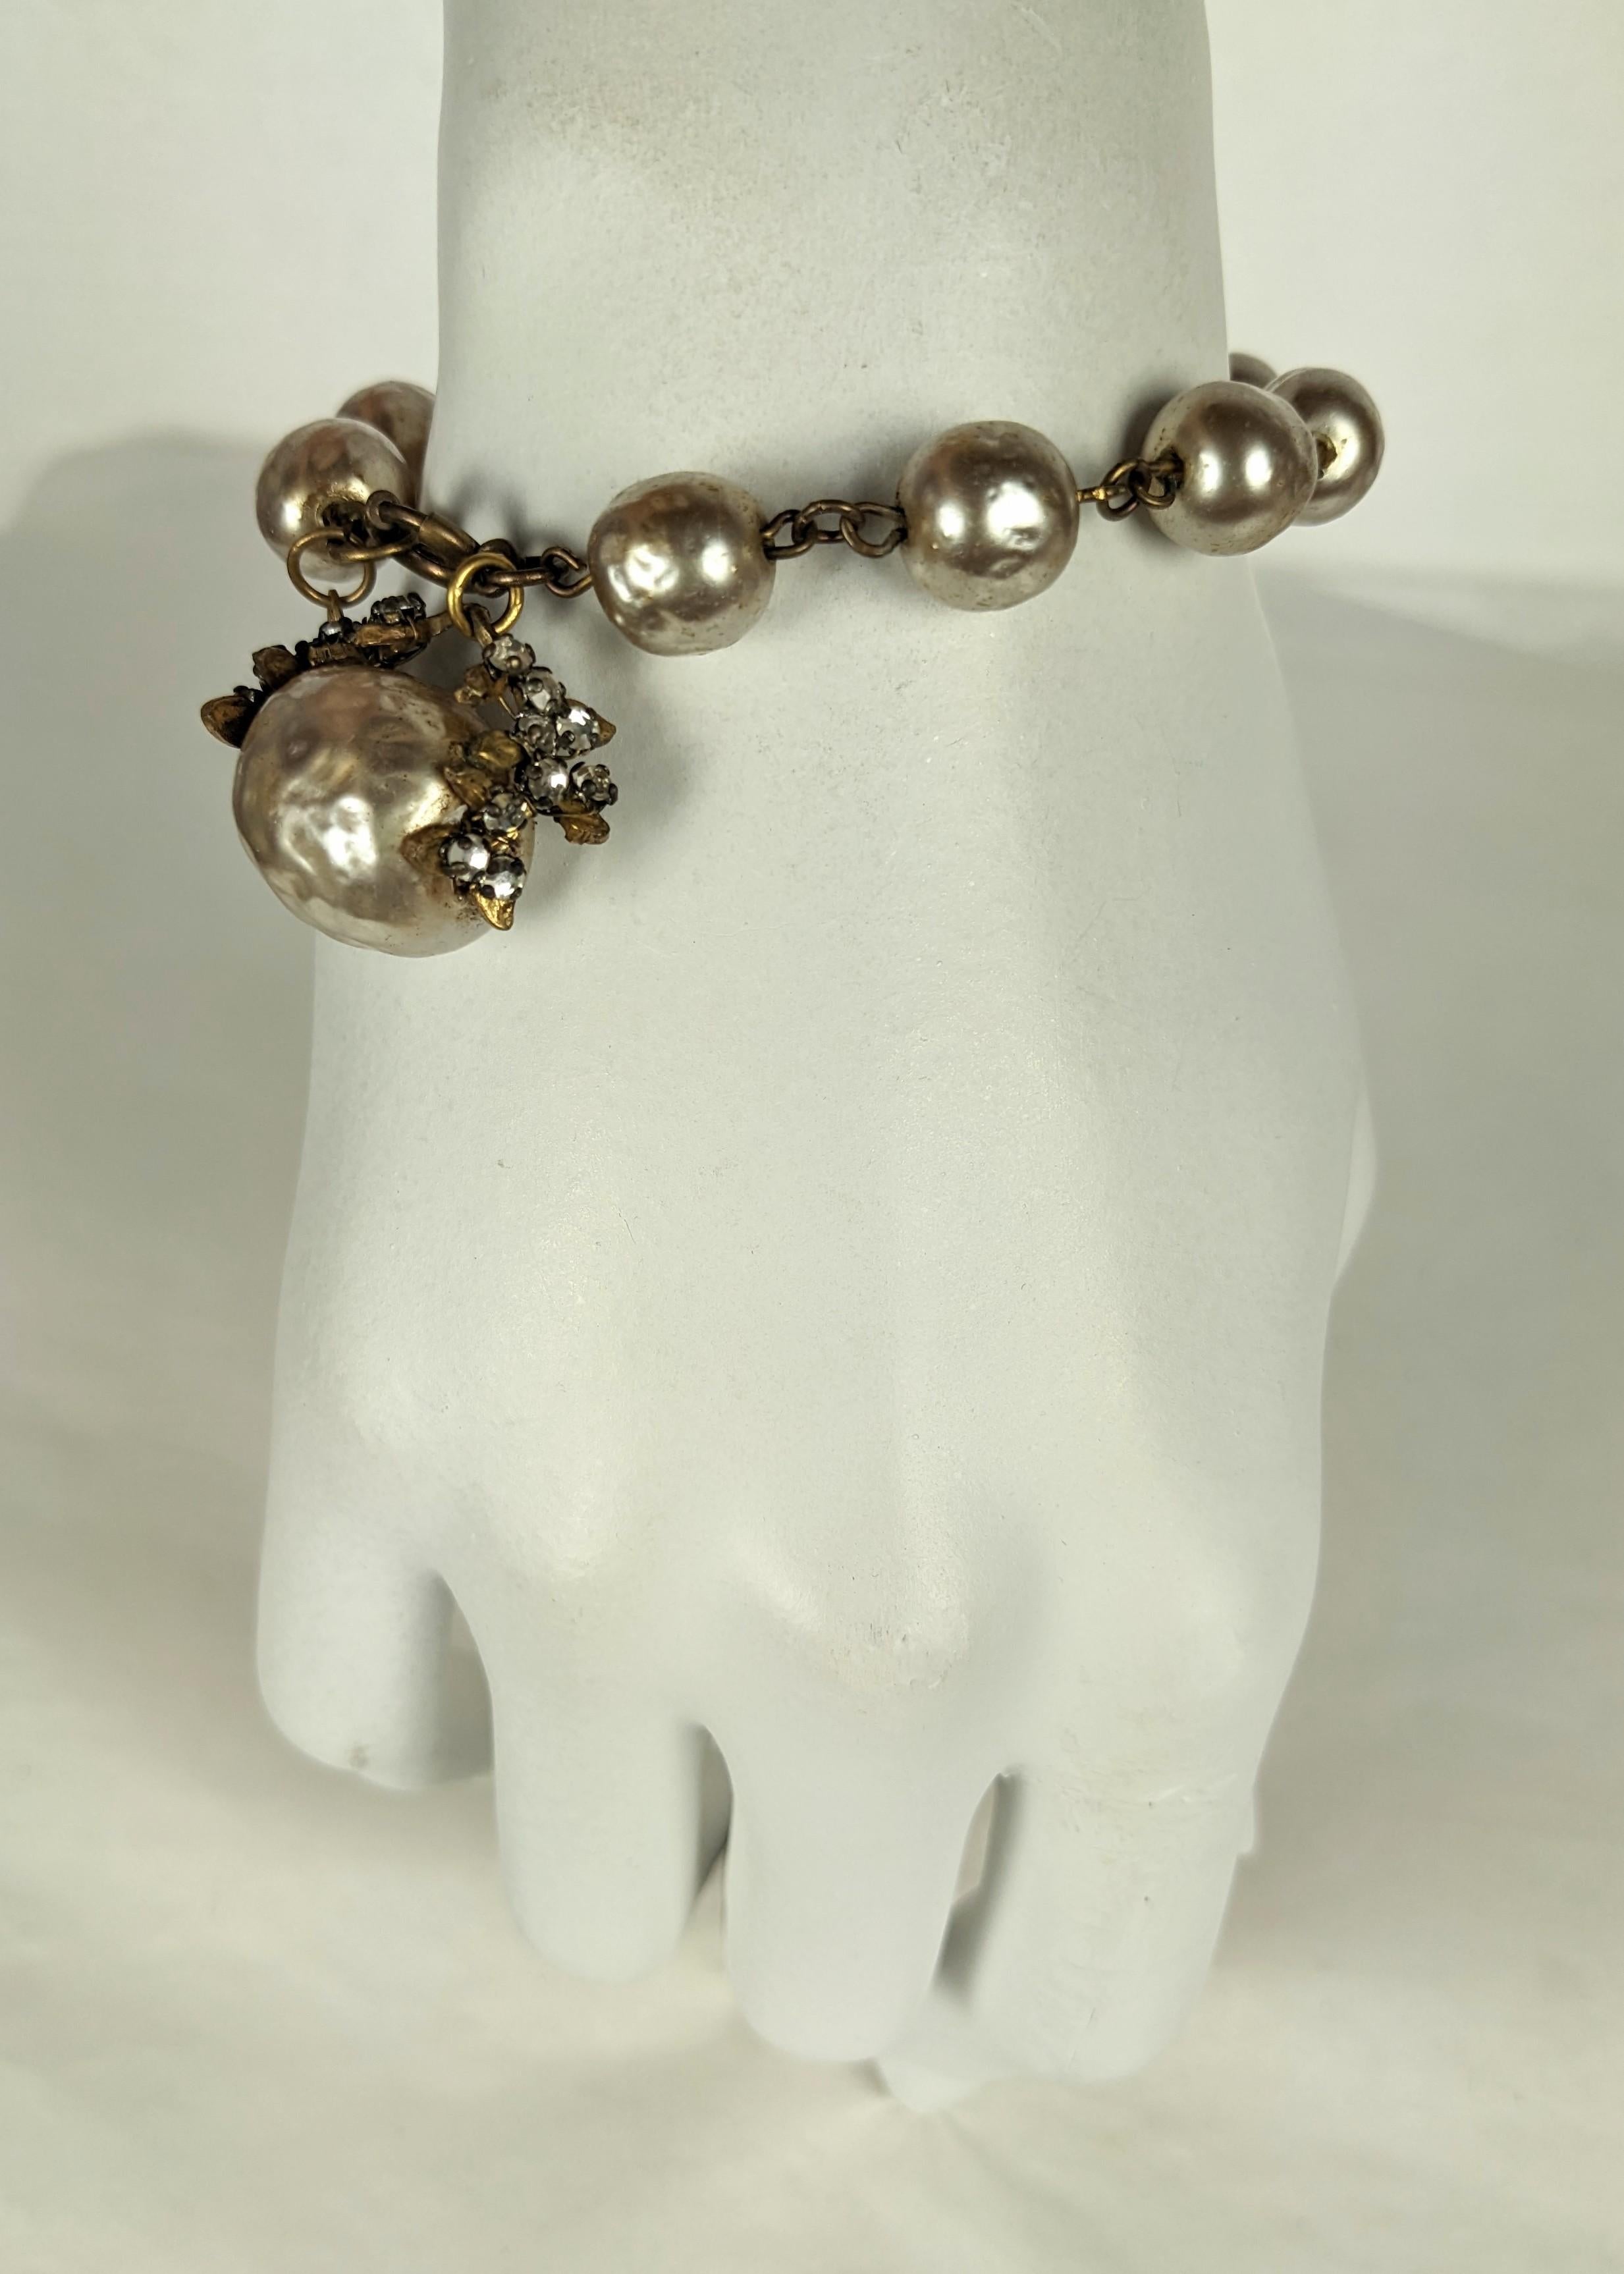 Women's Miriam Haskell Pearl Fob Bracelet For Sale